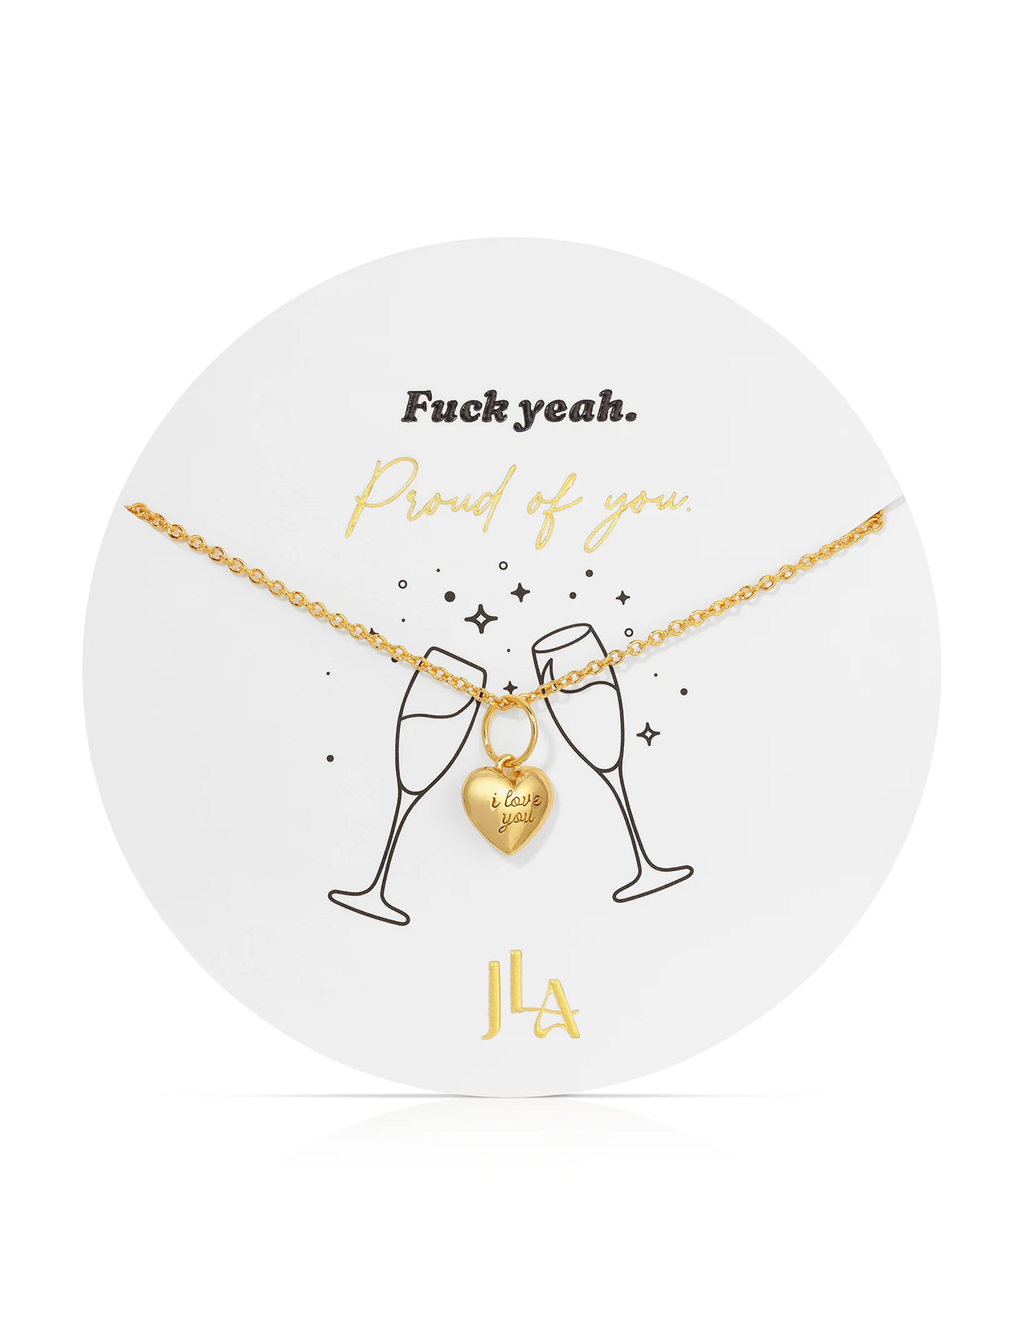 Proud Of You Heart Necklace 16-18", Gold